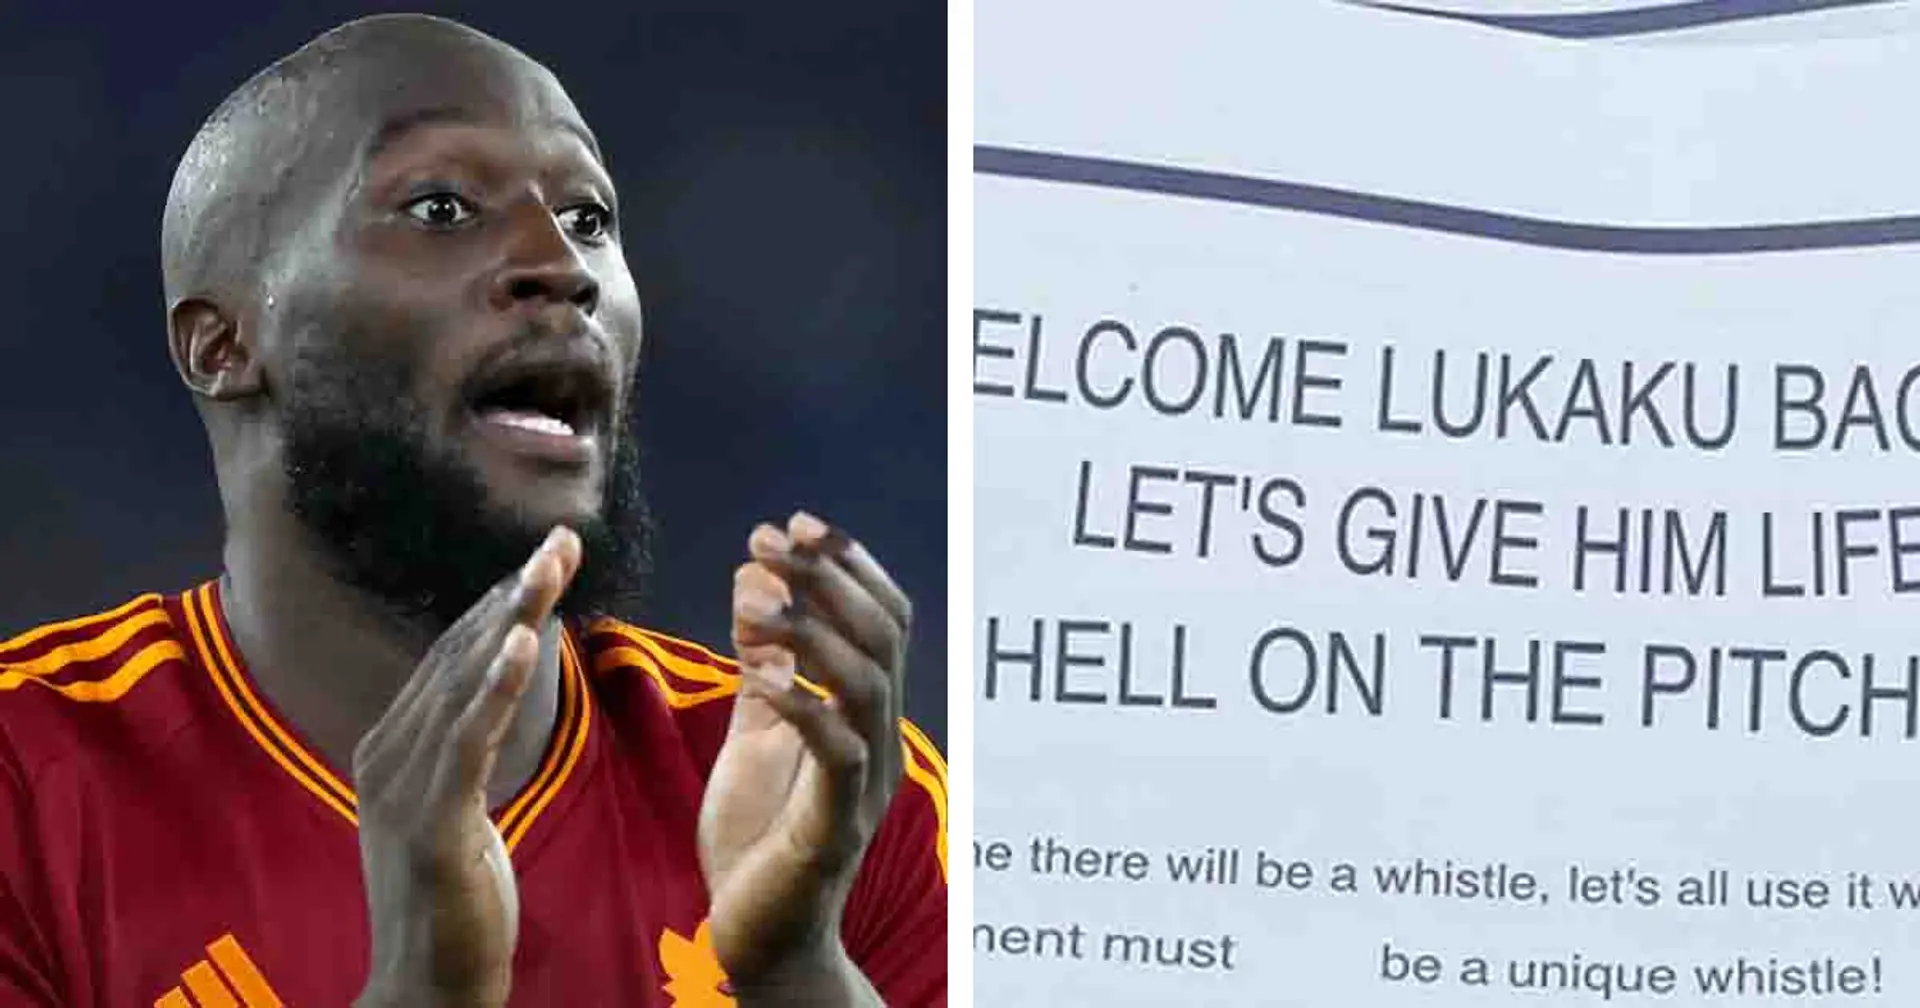 Spotted: Inter Milan ultra group's info sheet to fans in how to torment Lukaku